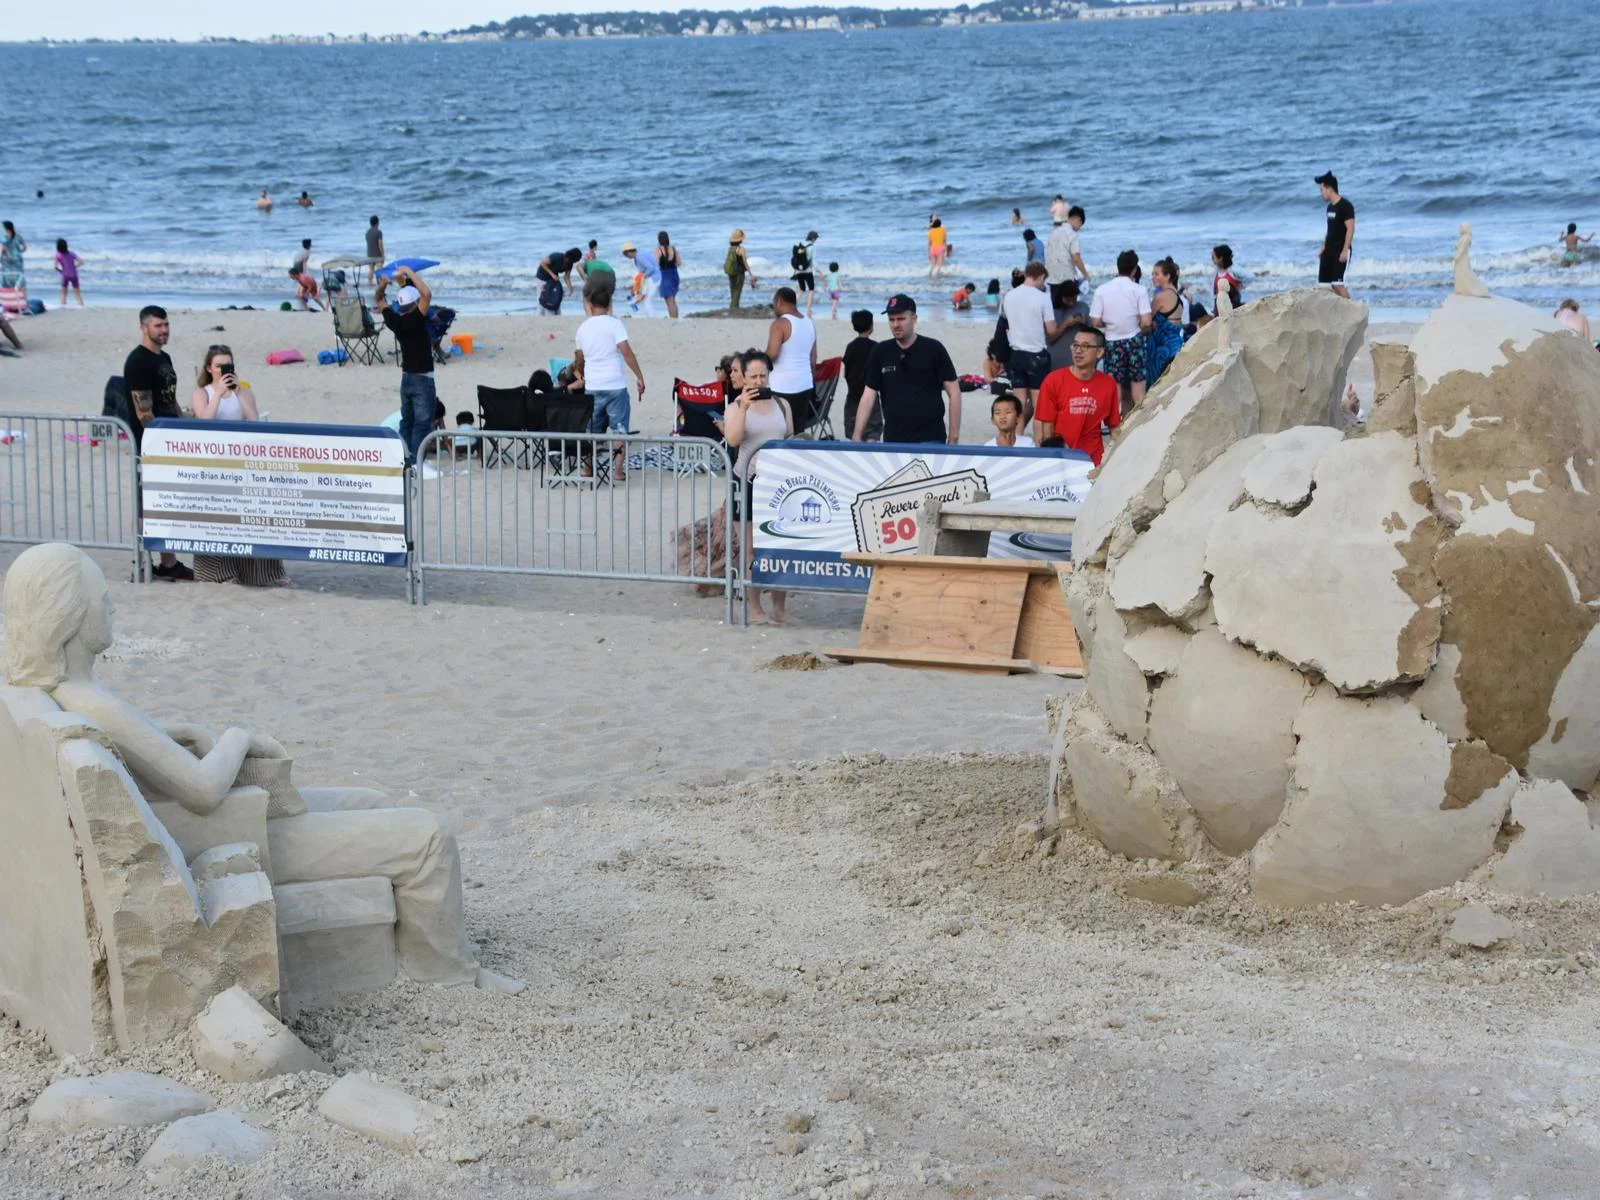 People taking picture of the sand sculptures at Revere Beach in Massachusetts, famed as one of the best beaches on the East Coast, during the International Sand Sculpting Festival